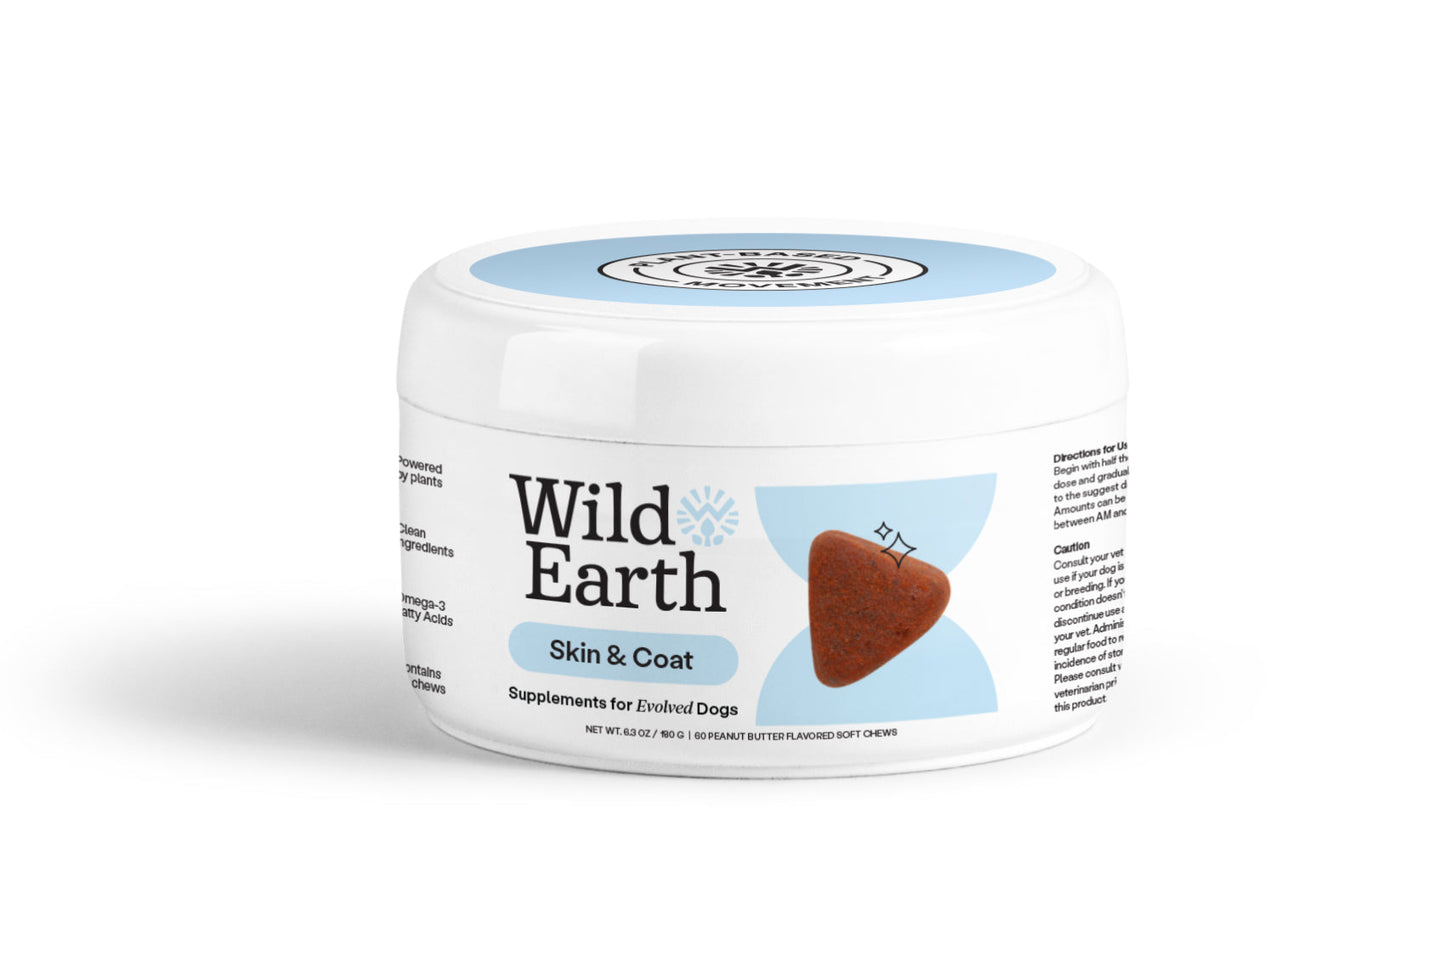 Skin & Coat Dog Supplements by Wild Earth